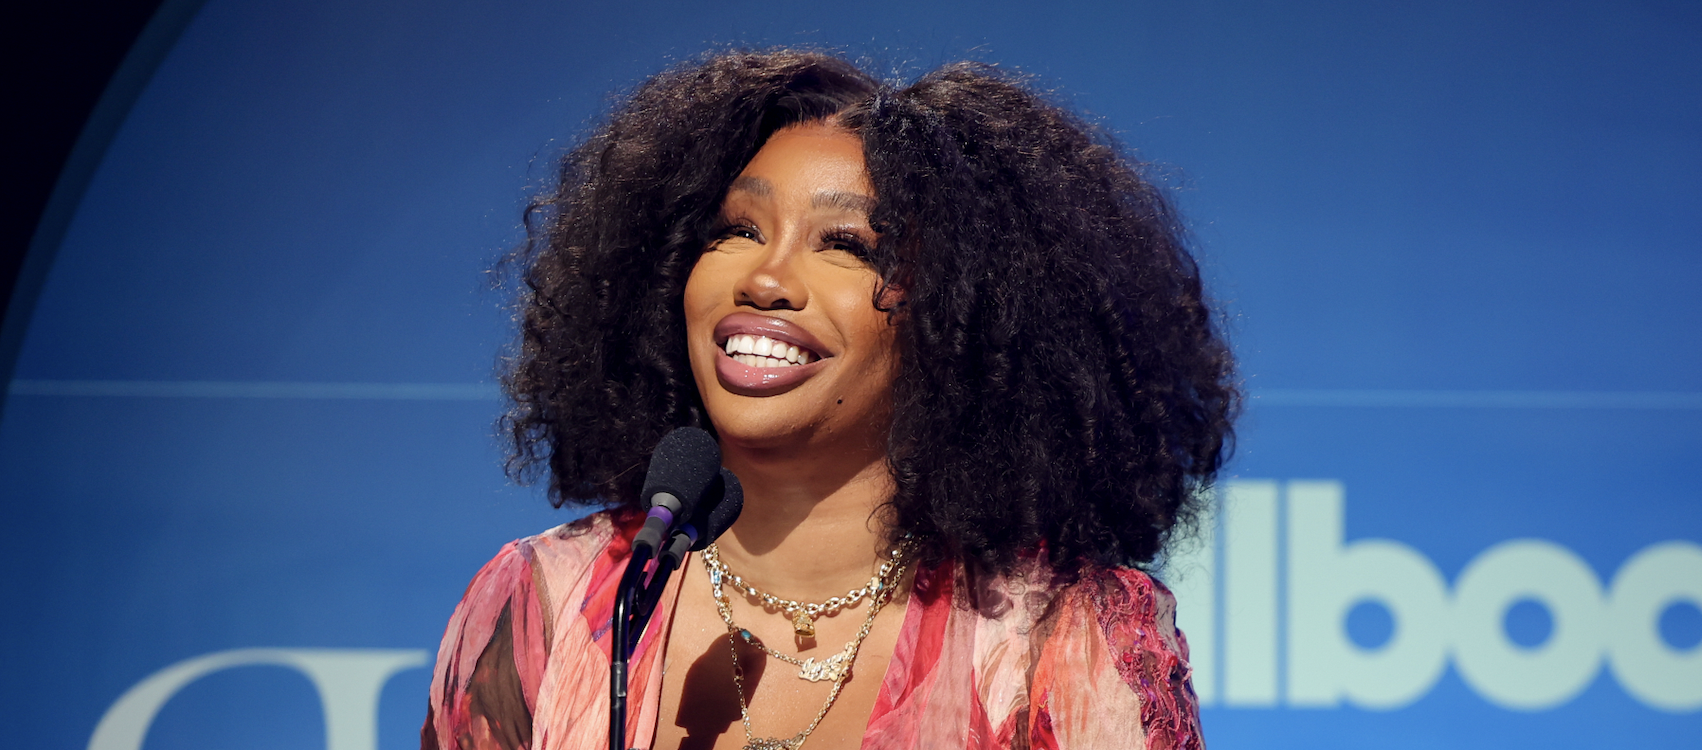 SZA Shows Off Stunning Fit & Body For Atlanta Show